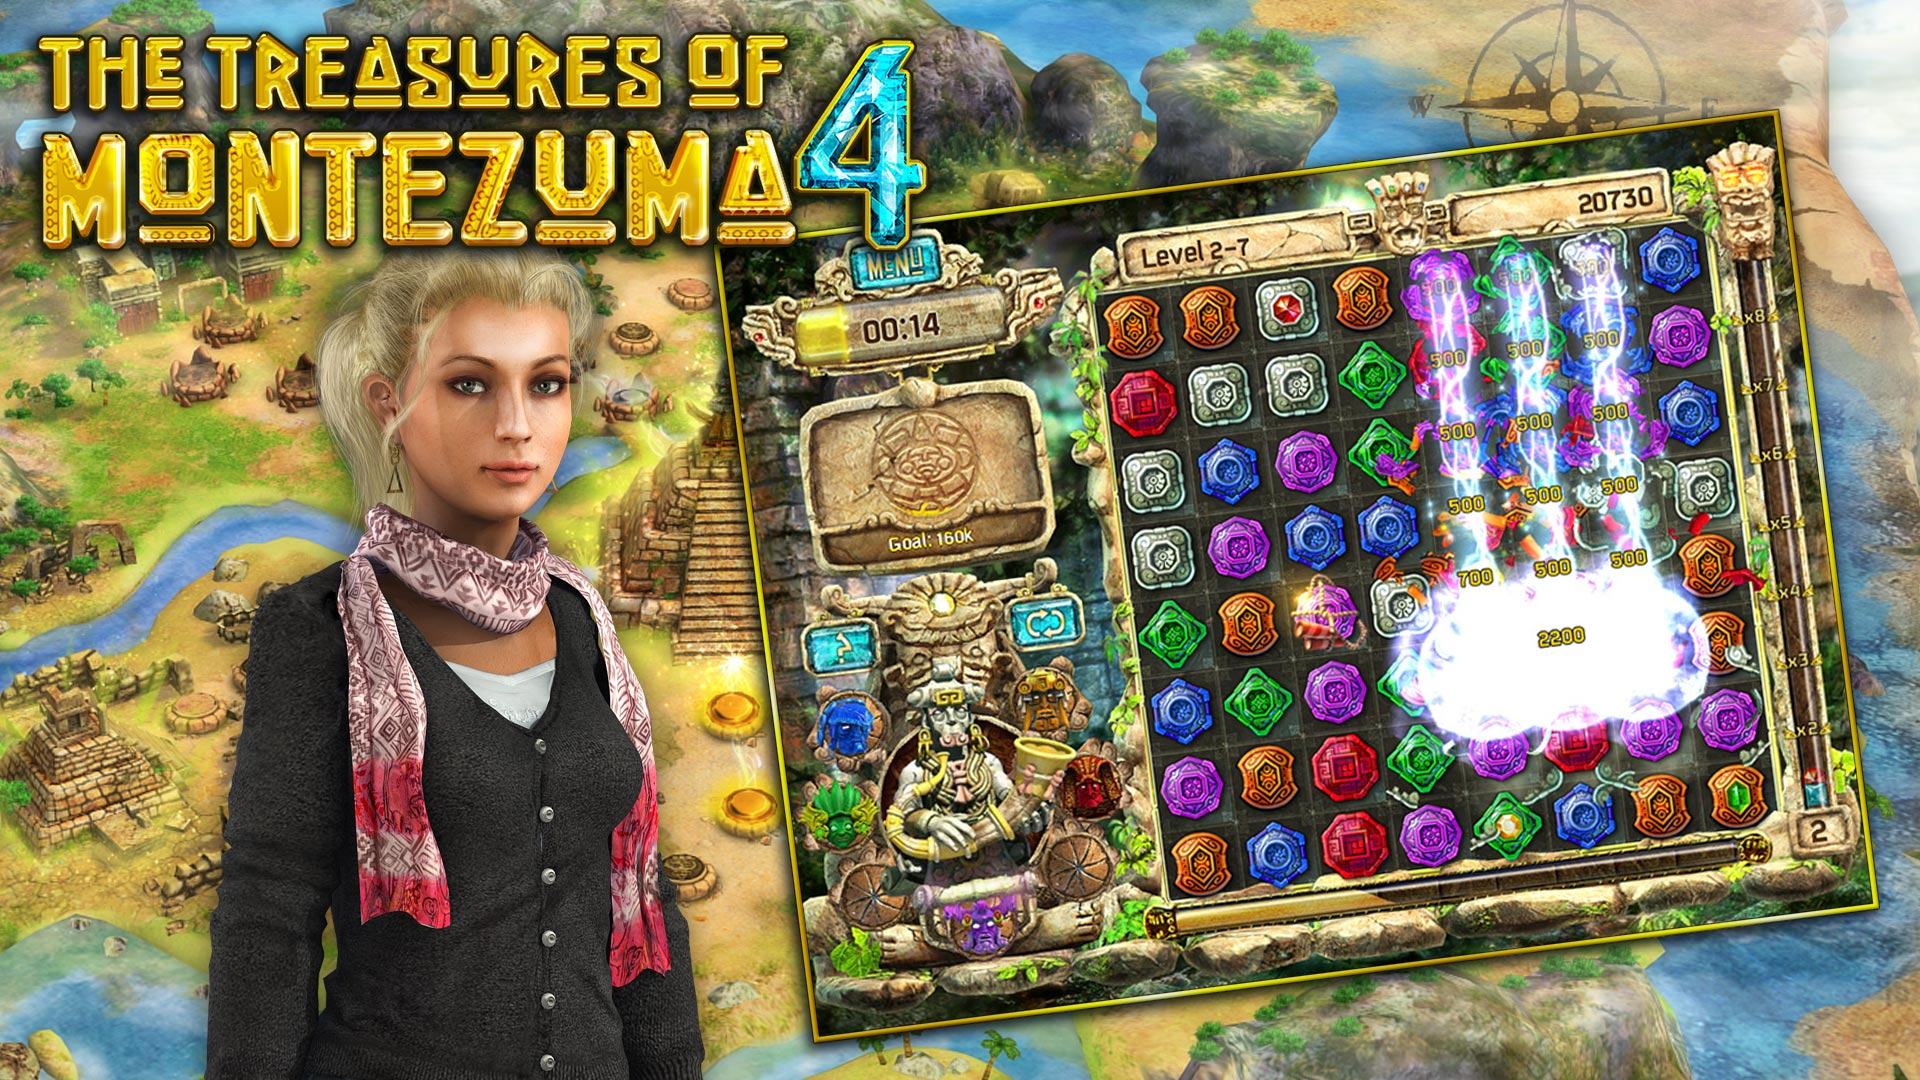 The Treasures of Montezuma 3 download the last version for iphone